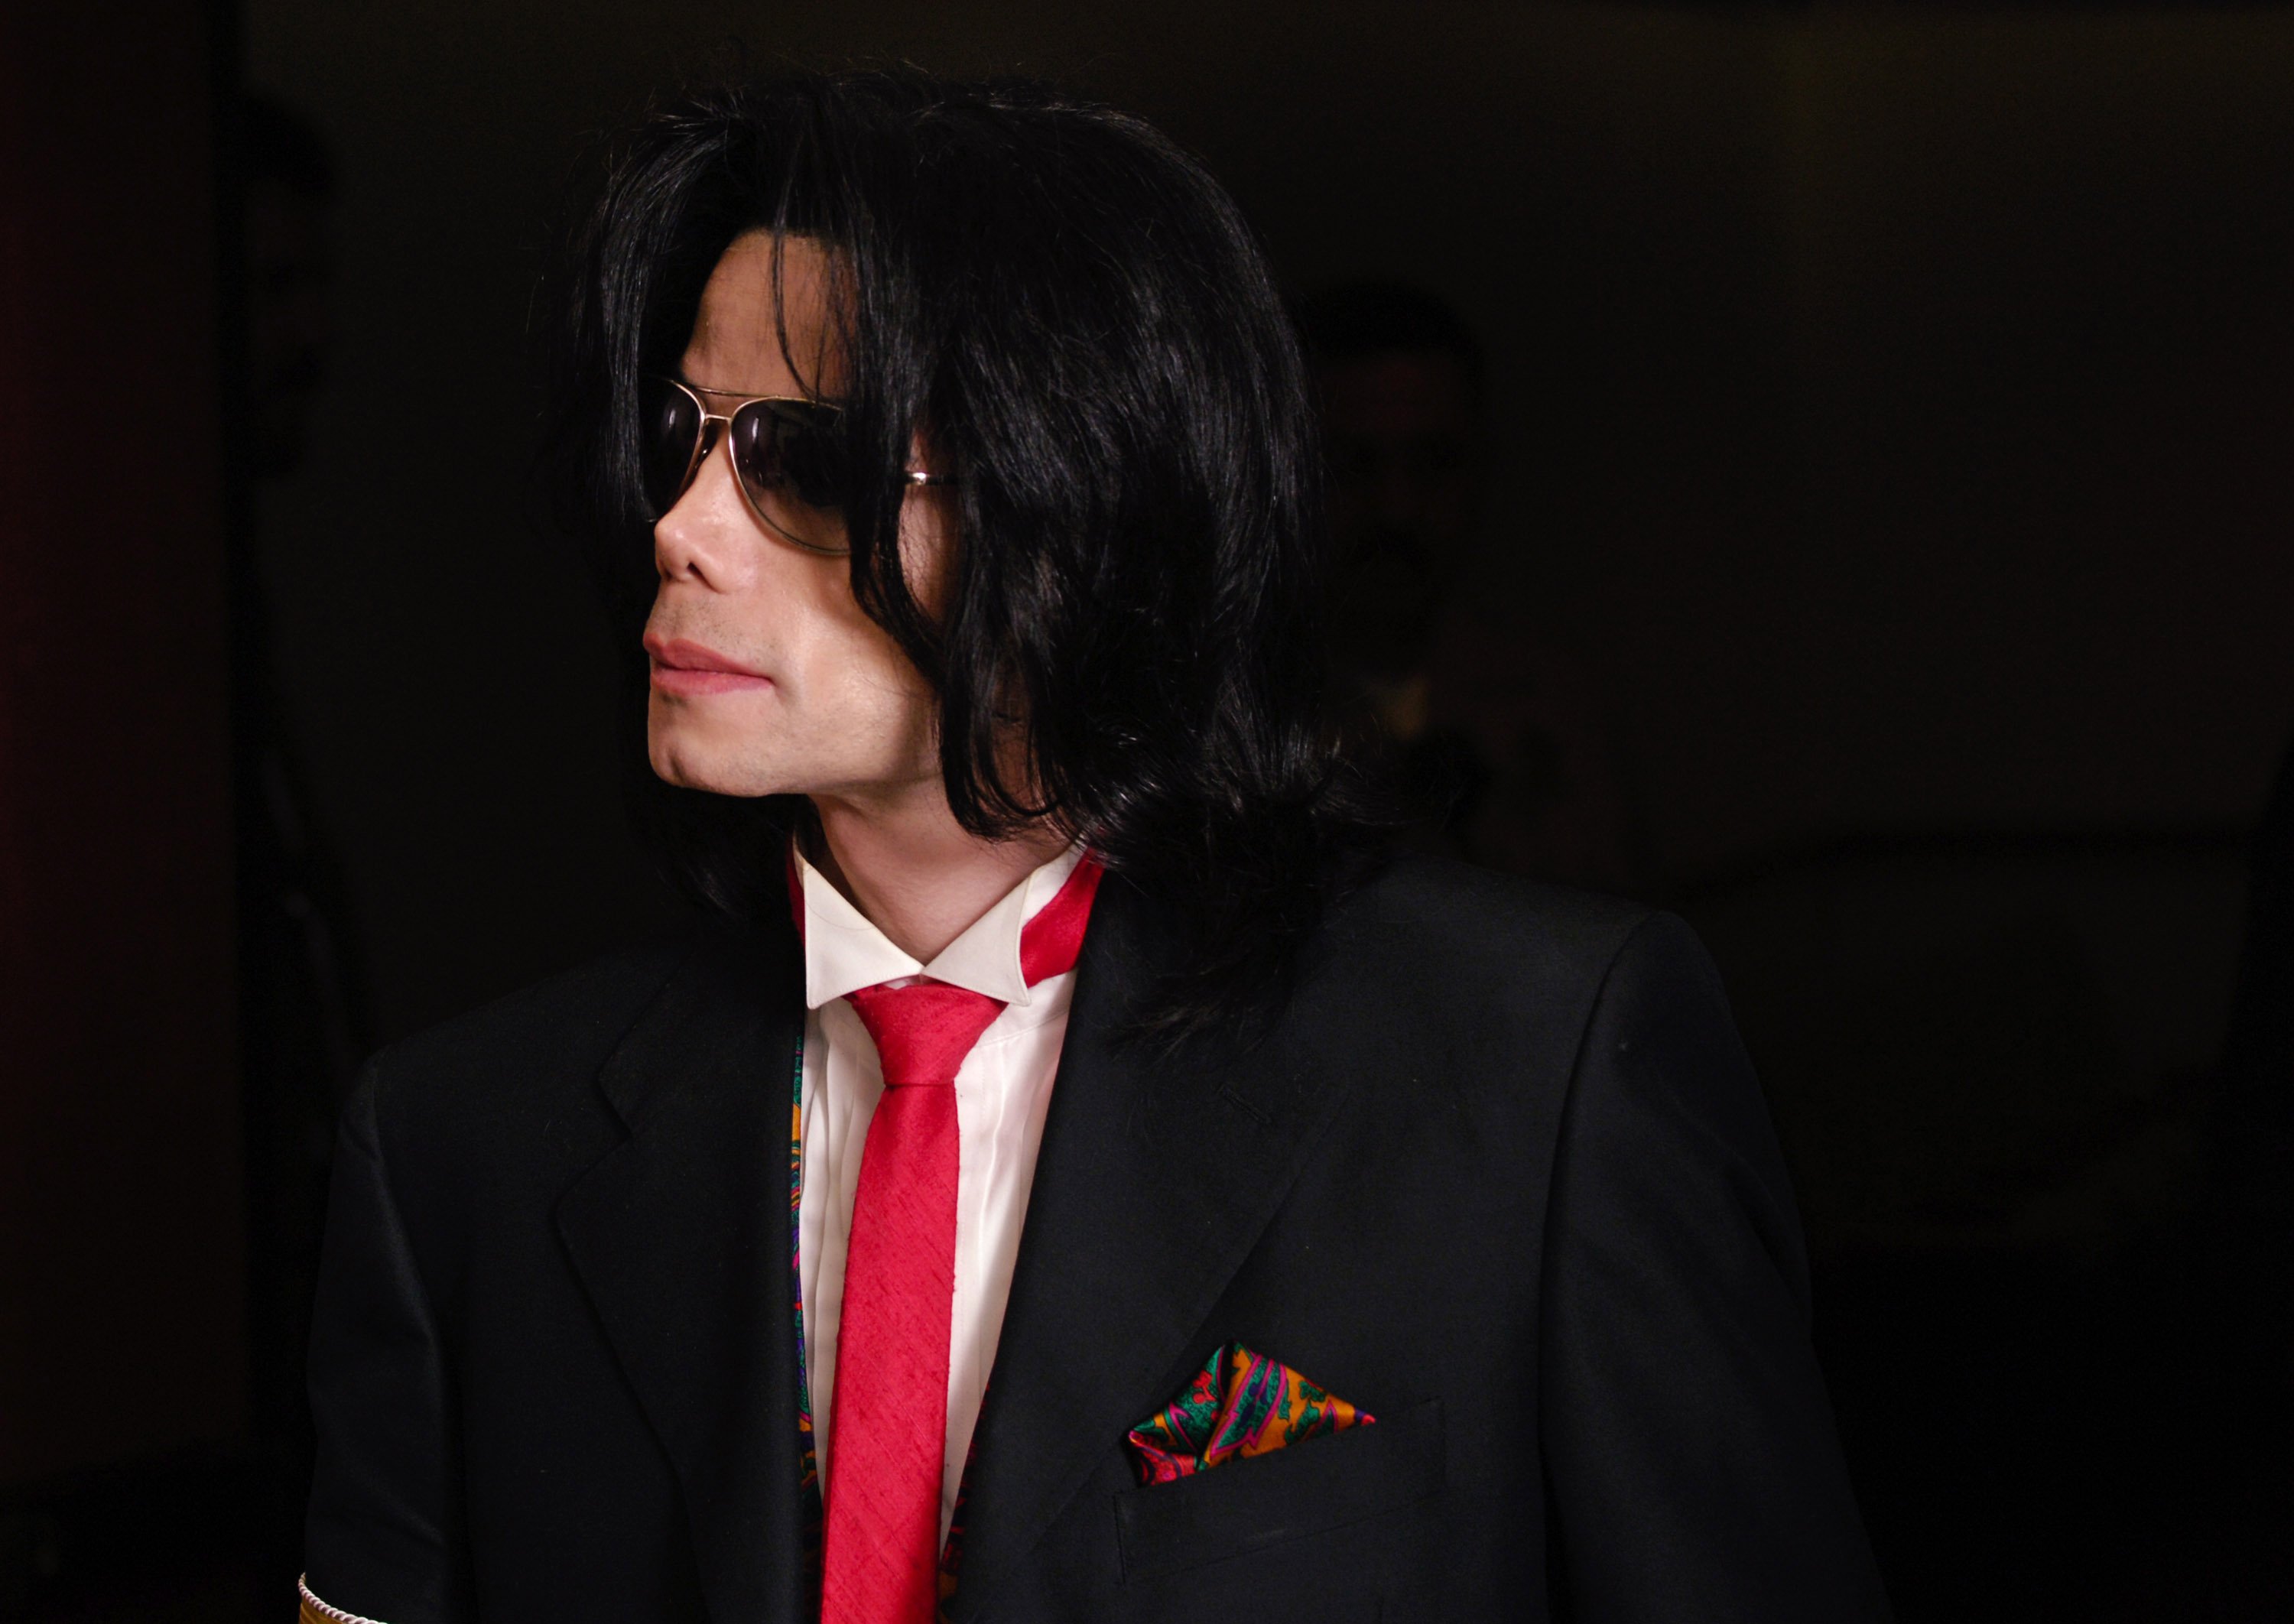 Michael Jackson leaves the courtroom following proceedings in his child molestation trial, 2005. | Photo: GettyImages